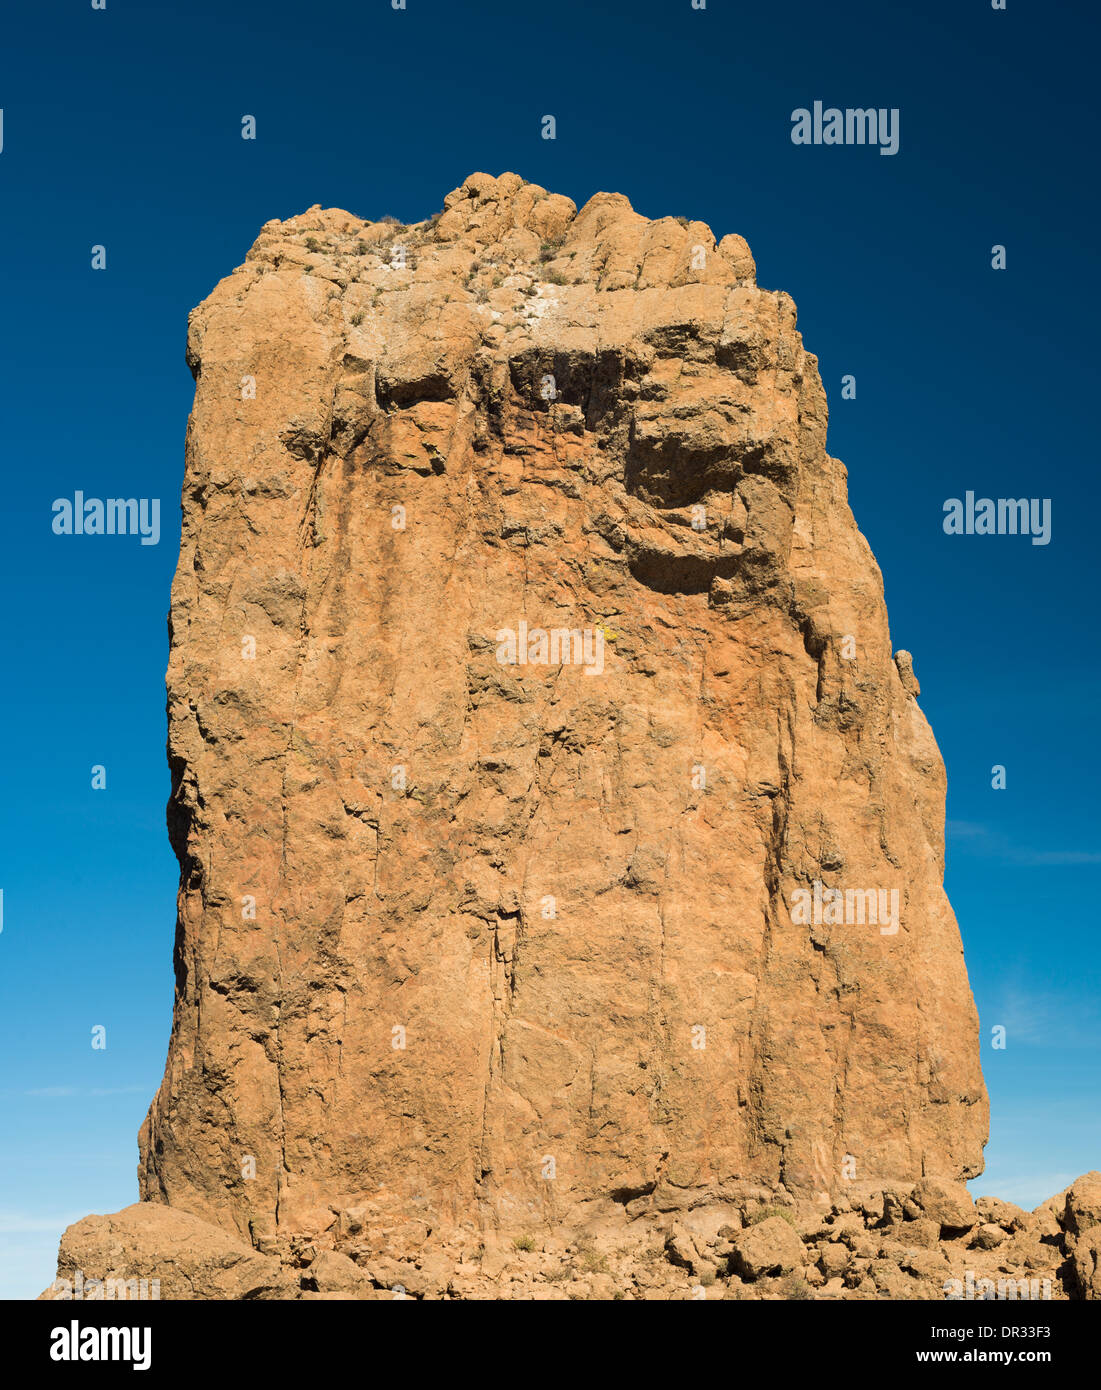 Close-up of Roque Nublo, one of the most iconic natural features of Gran Canaria, Canary Islands, Spain Stock Photo